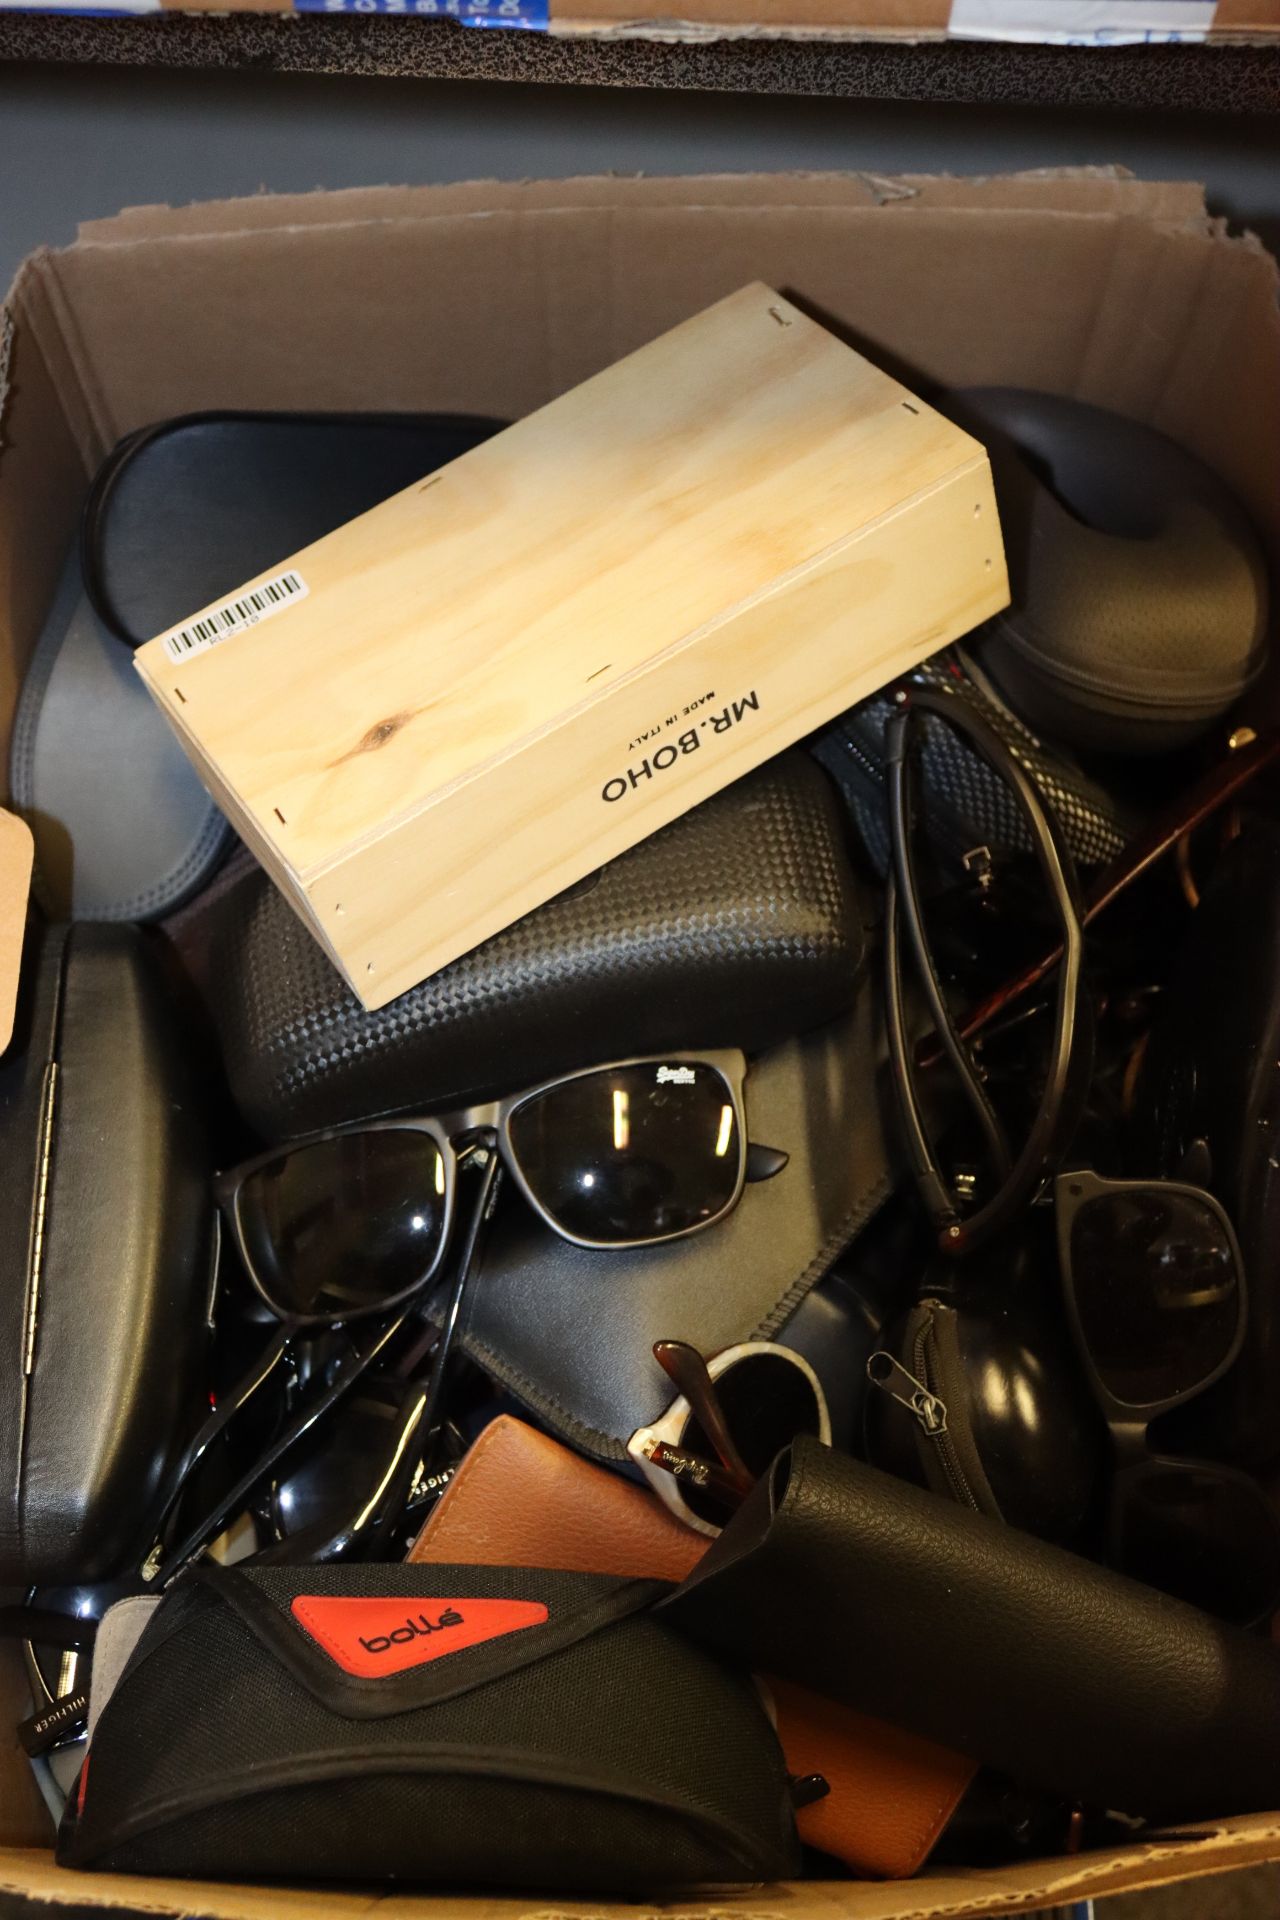 A quantity of unbranded sunglasses.